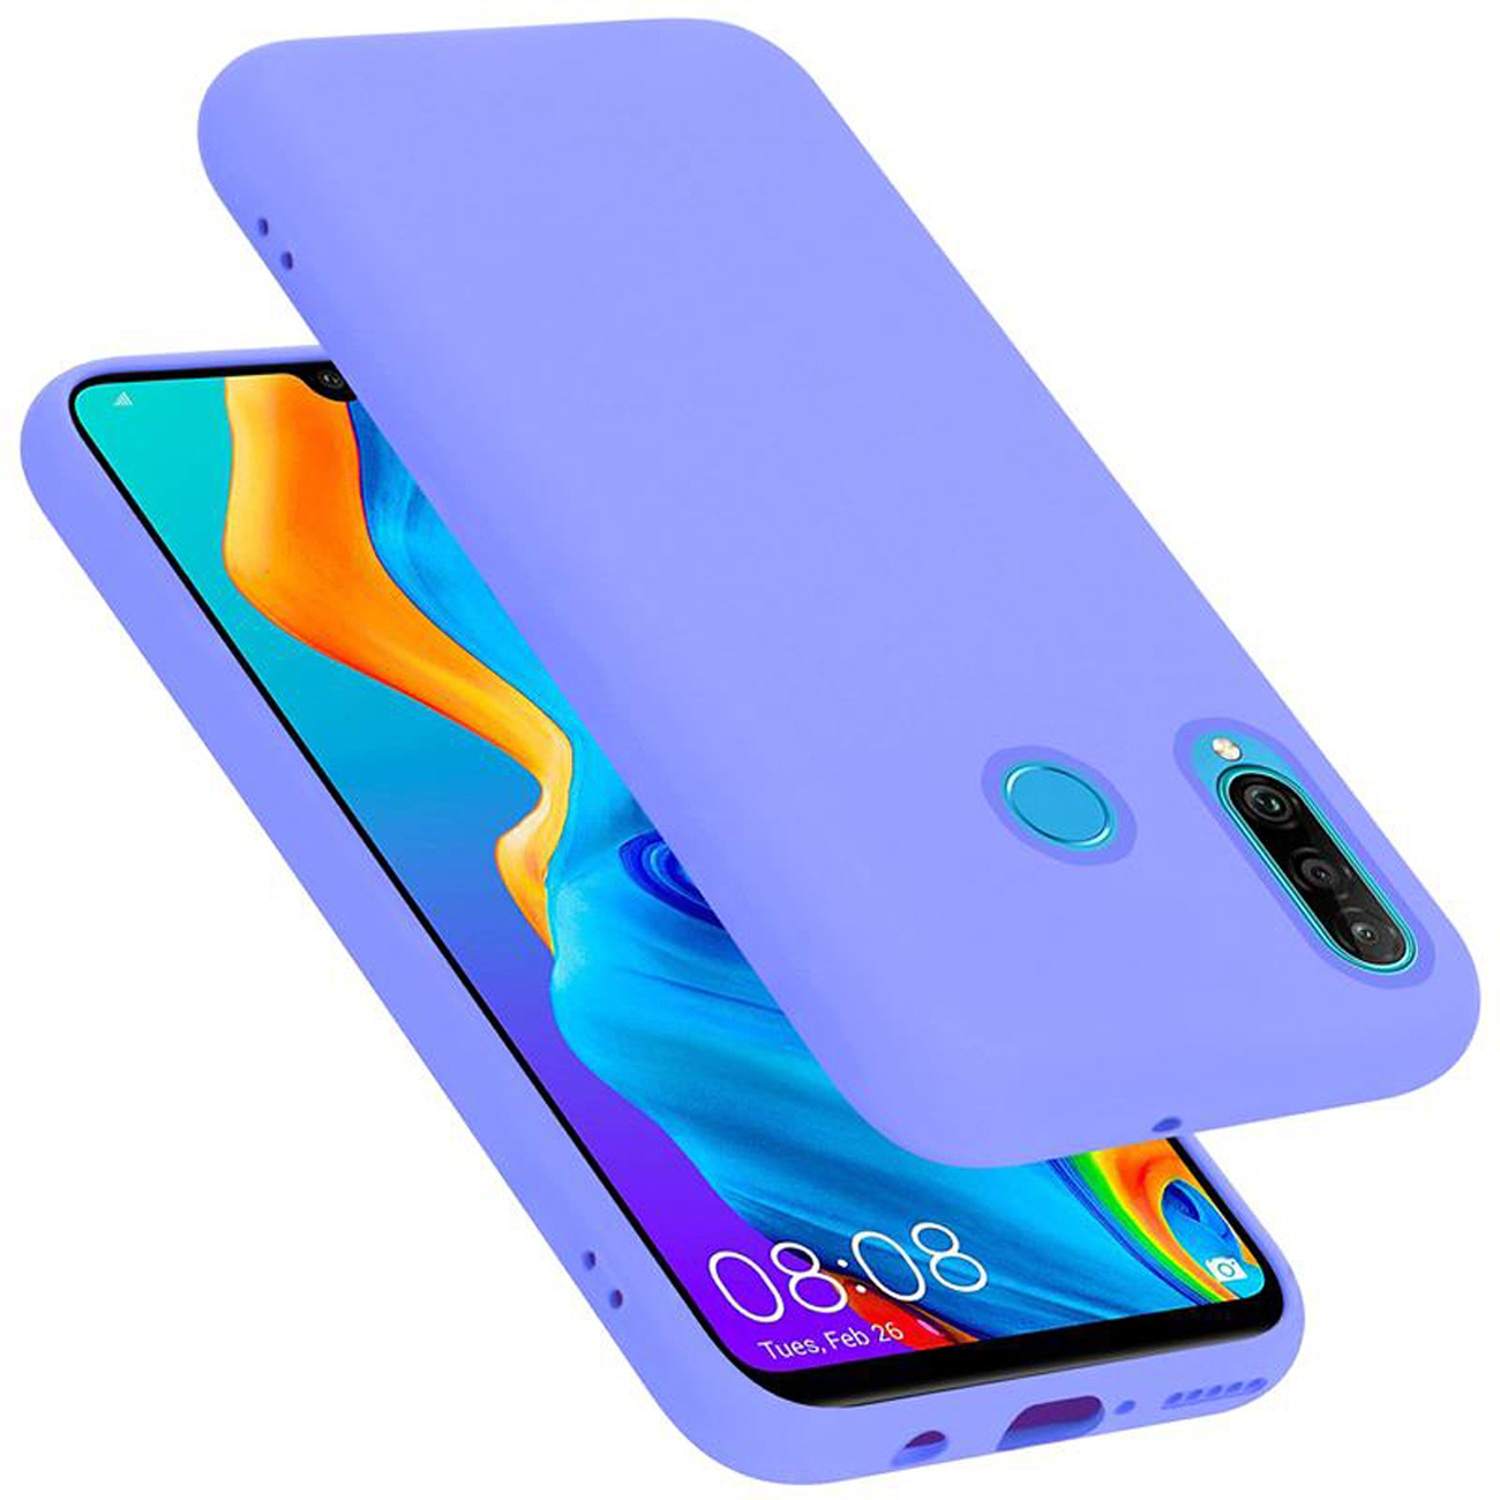 Hülle Liquid Huawei, P30 Case LITE, Backcover, LILA LIQUID Style, CADORABO im HELL Silicone